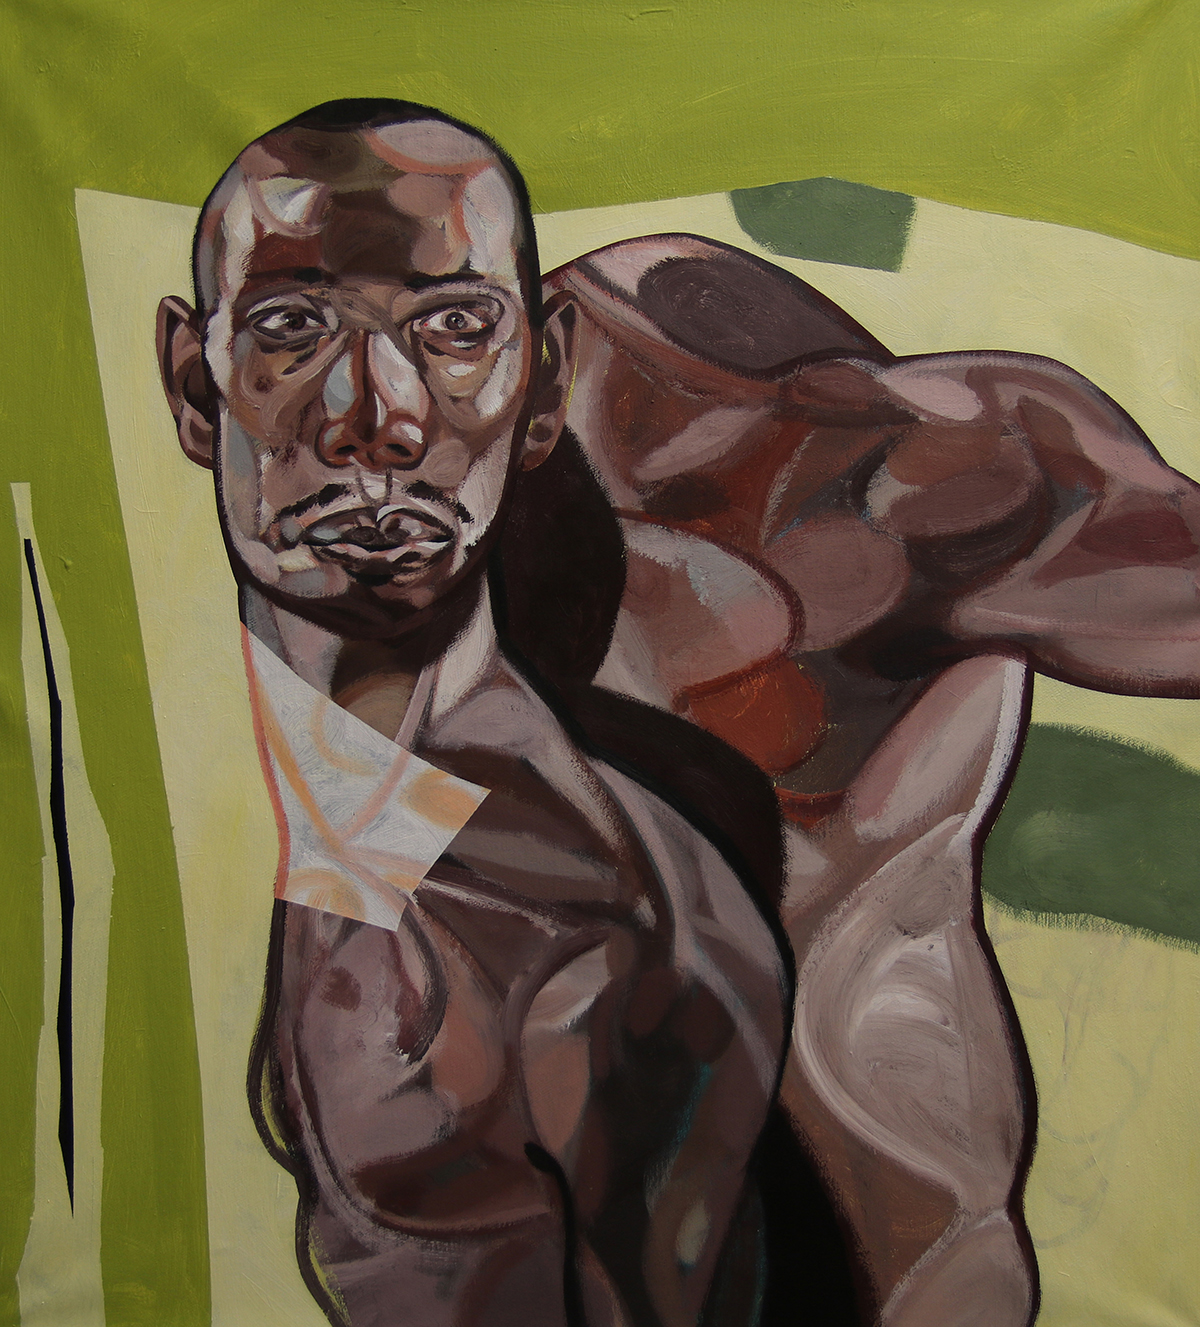 a painting of a black man disfigured in front of a green background